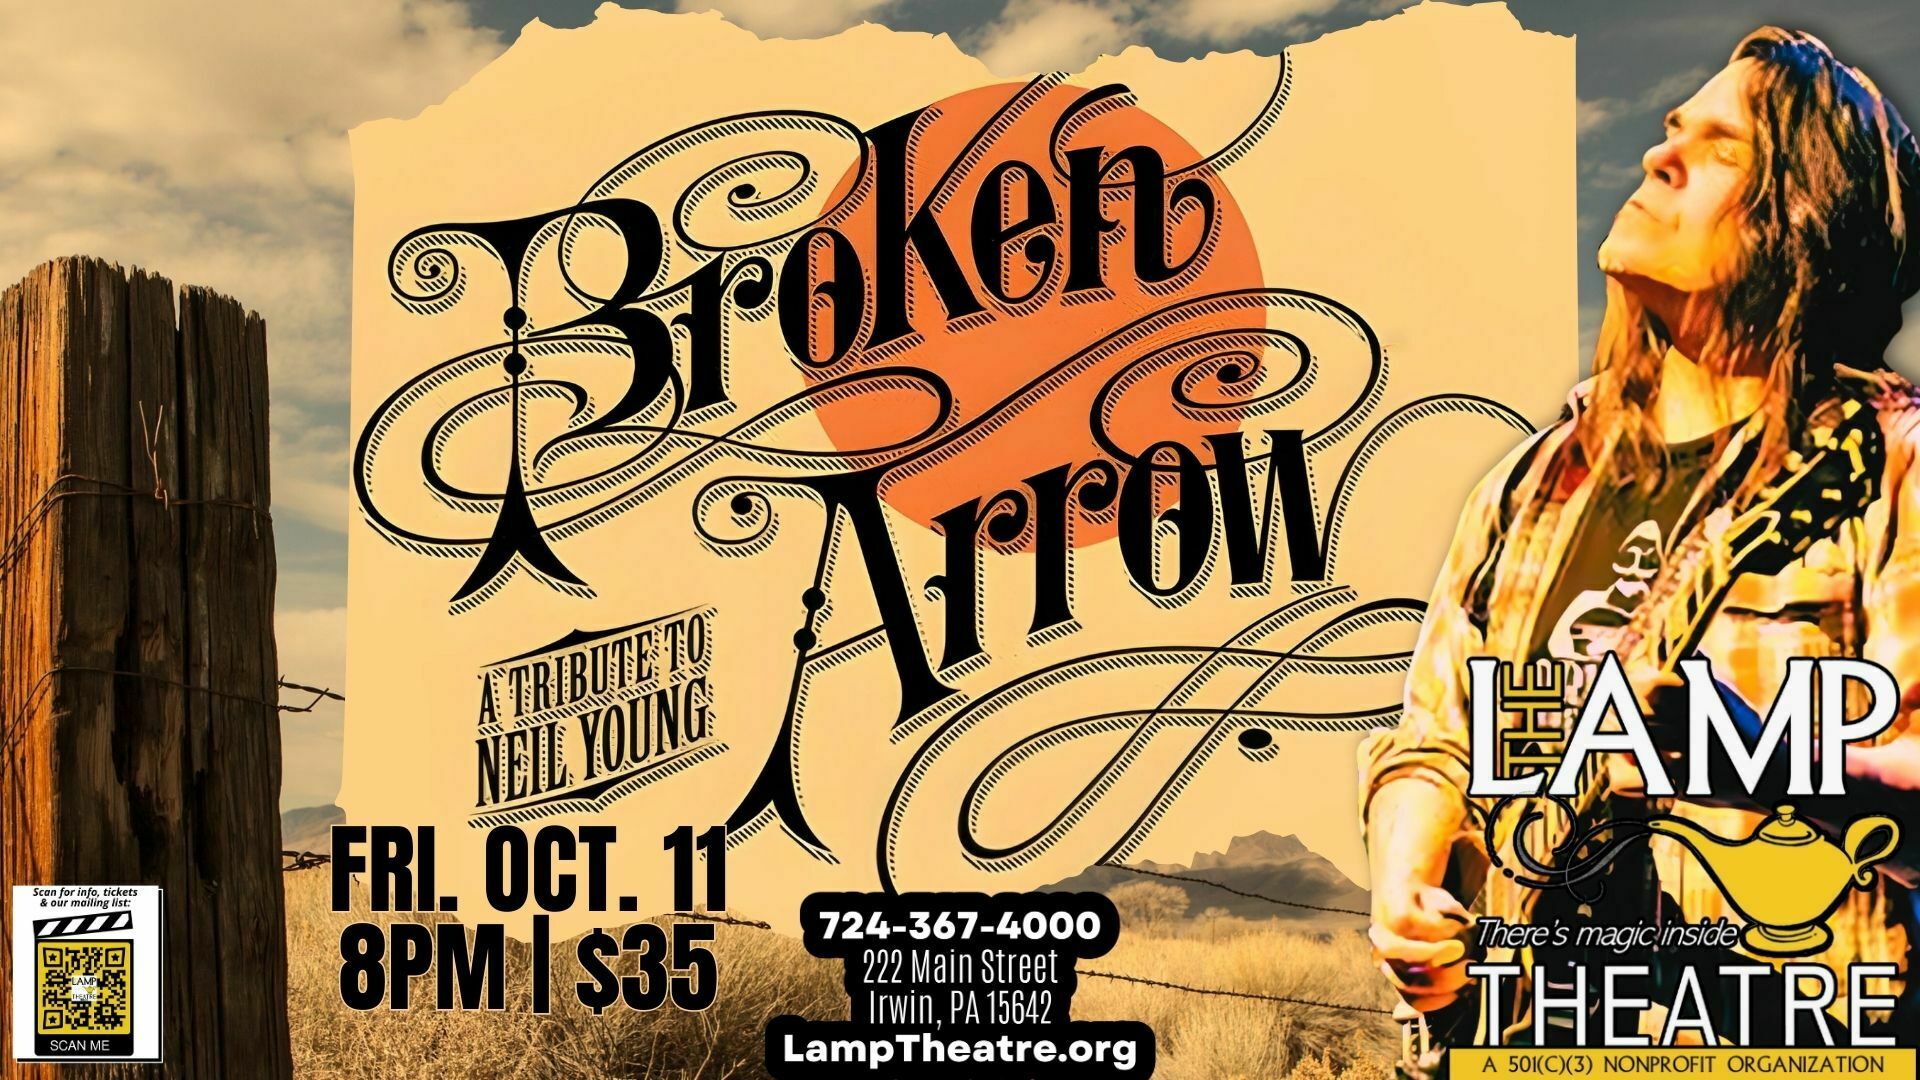 Broken Arrow: A Tribute to Neil Young, Irwin, Pennsylvania, United States